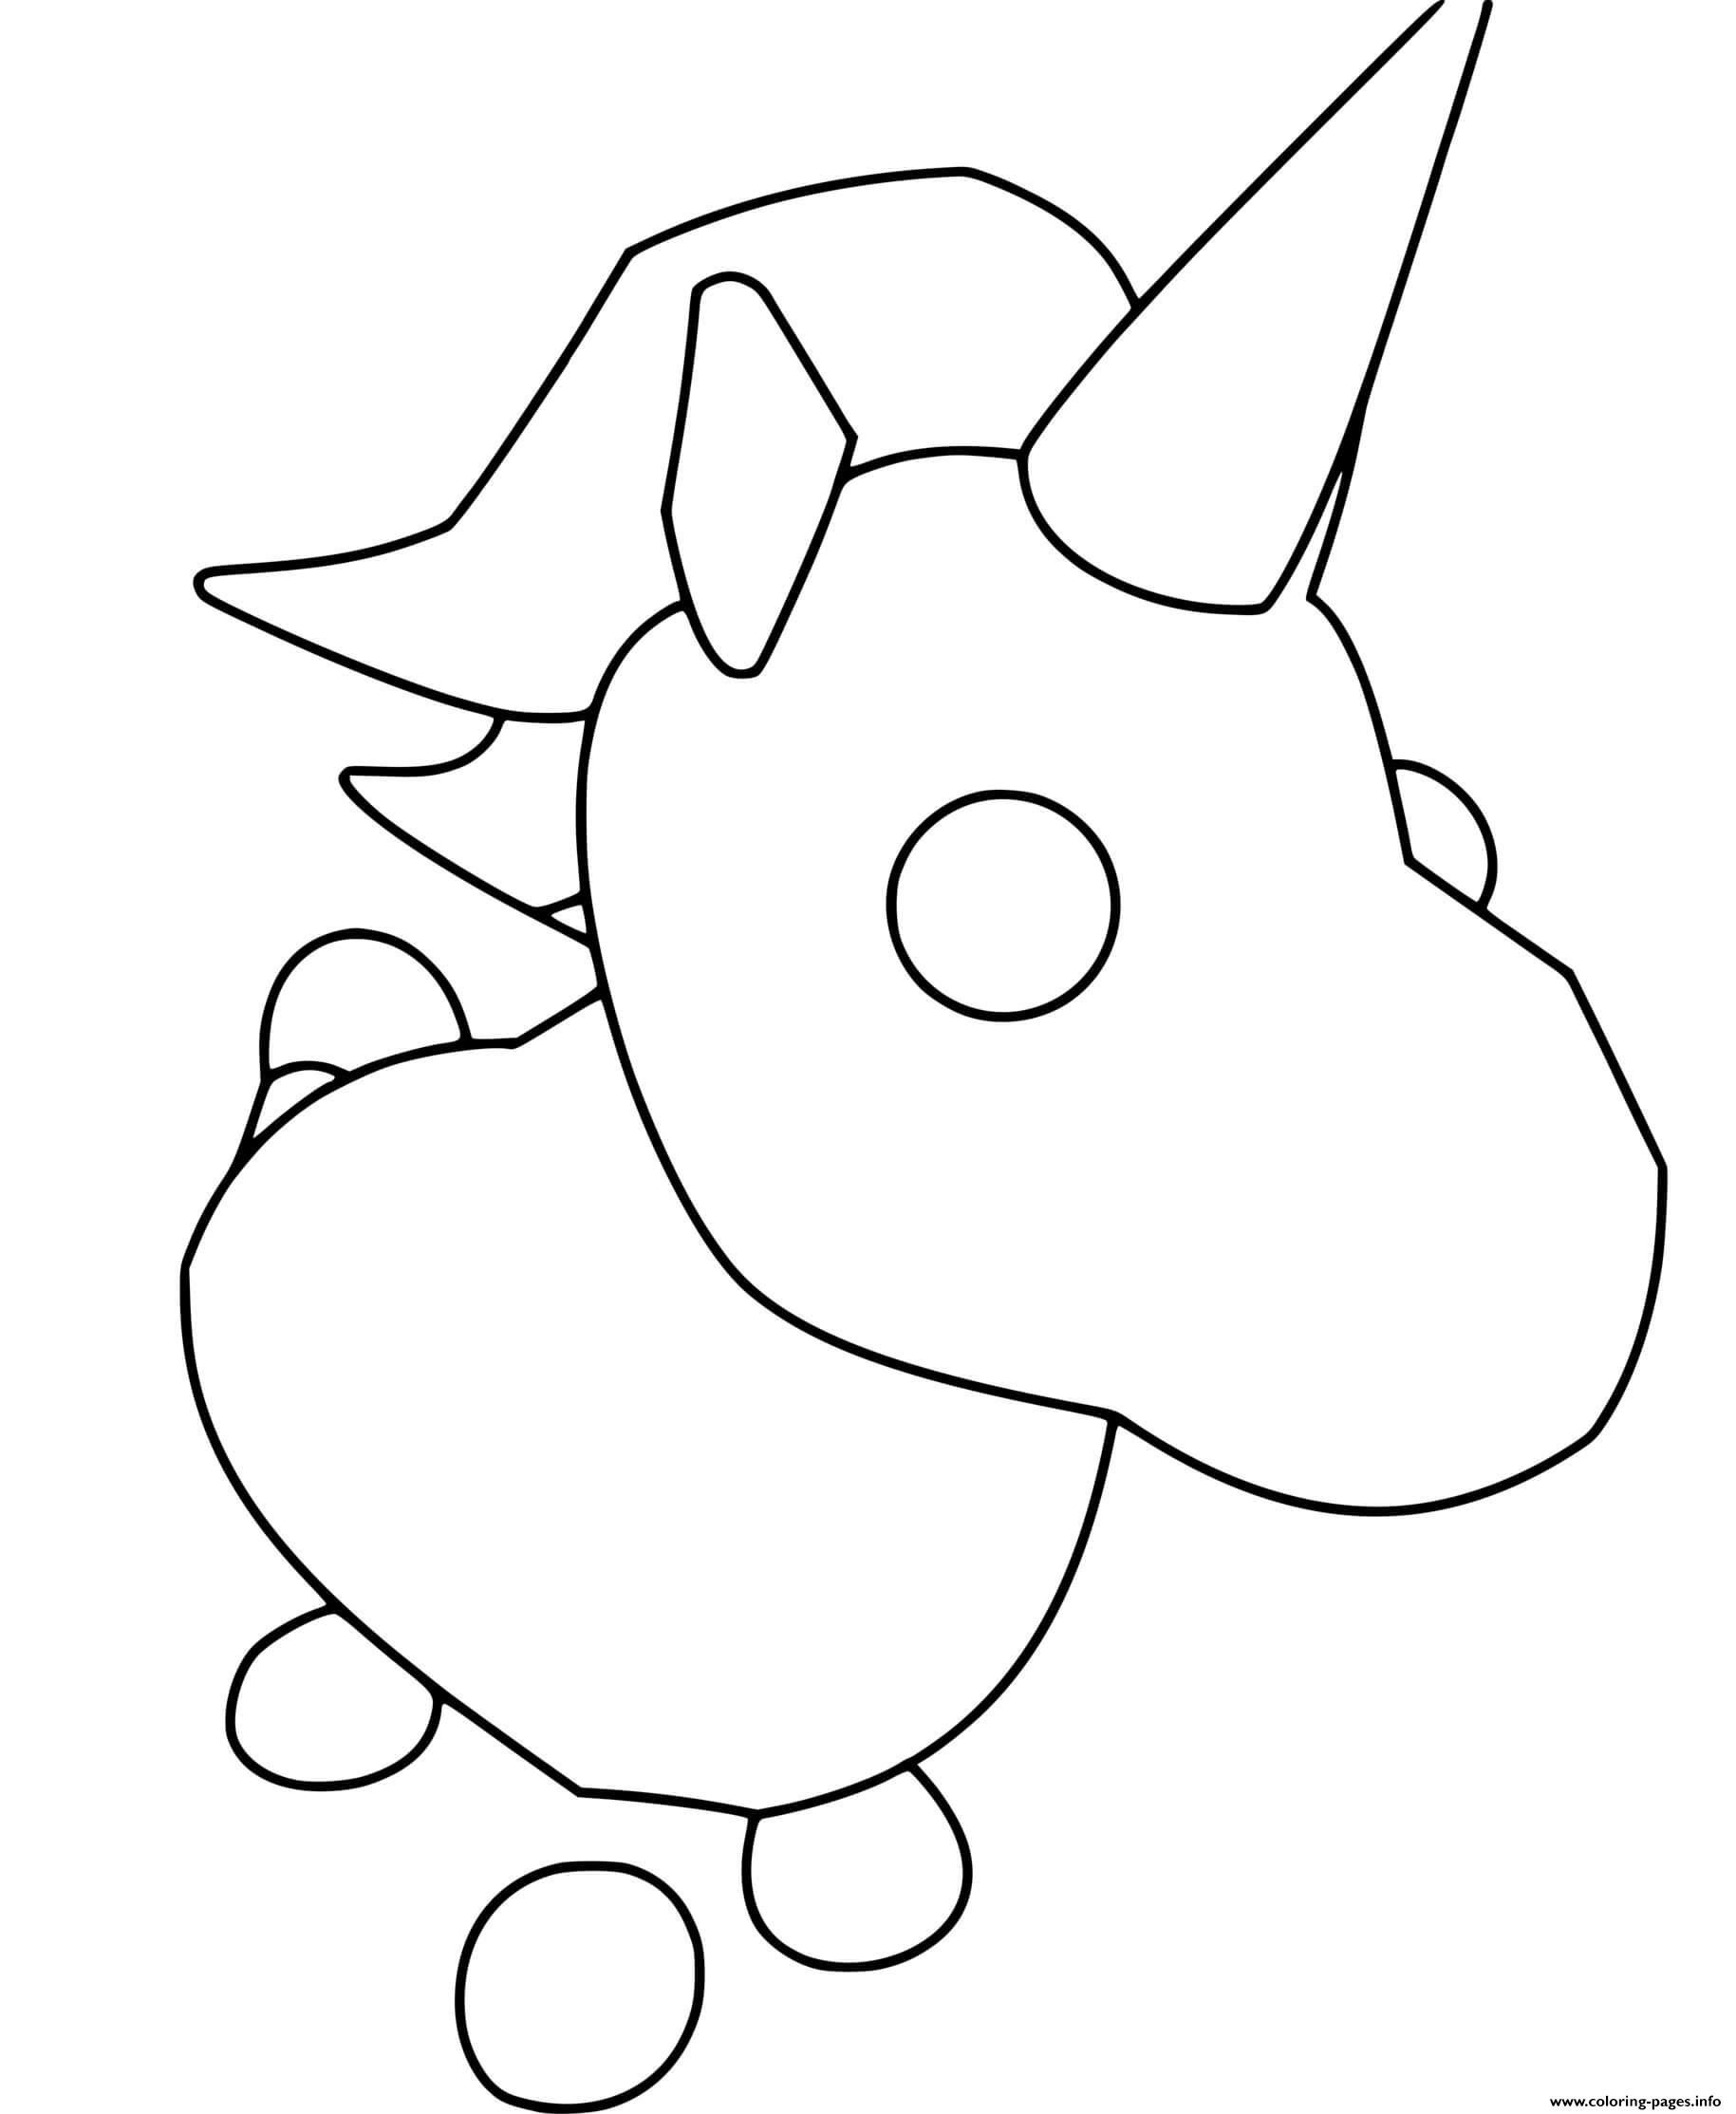 Adopt Me Unicorn Coloring Pages Printable